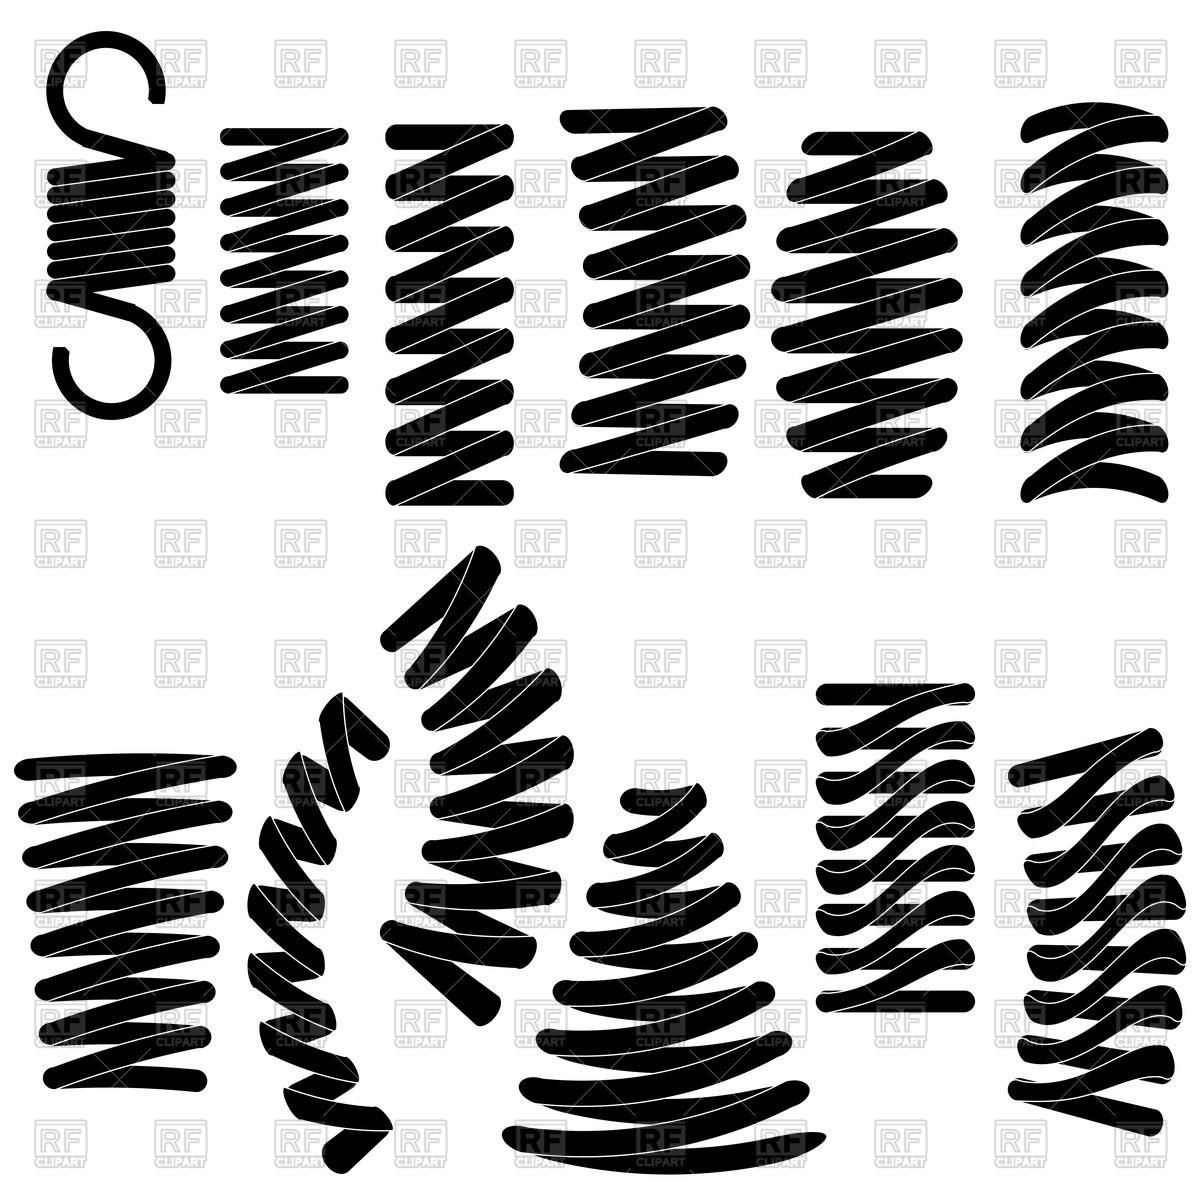 Springs silhouettes Vector Image #70816.